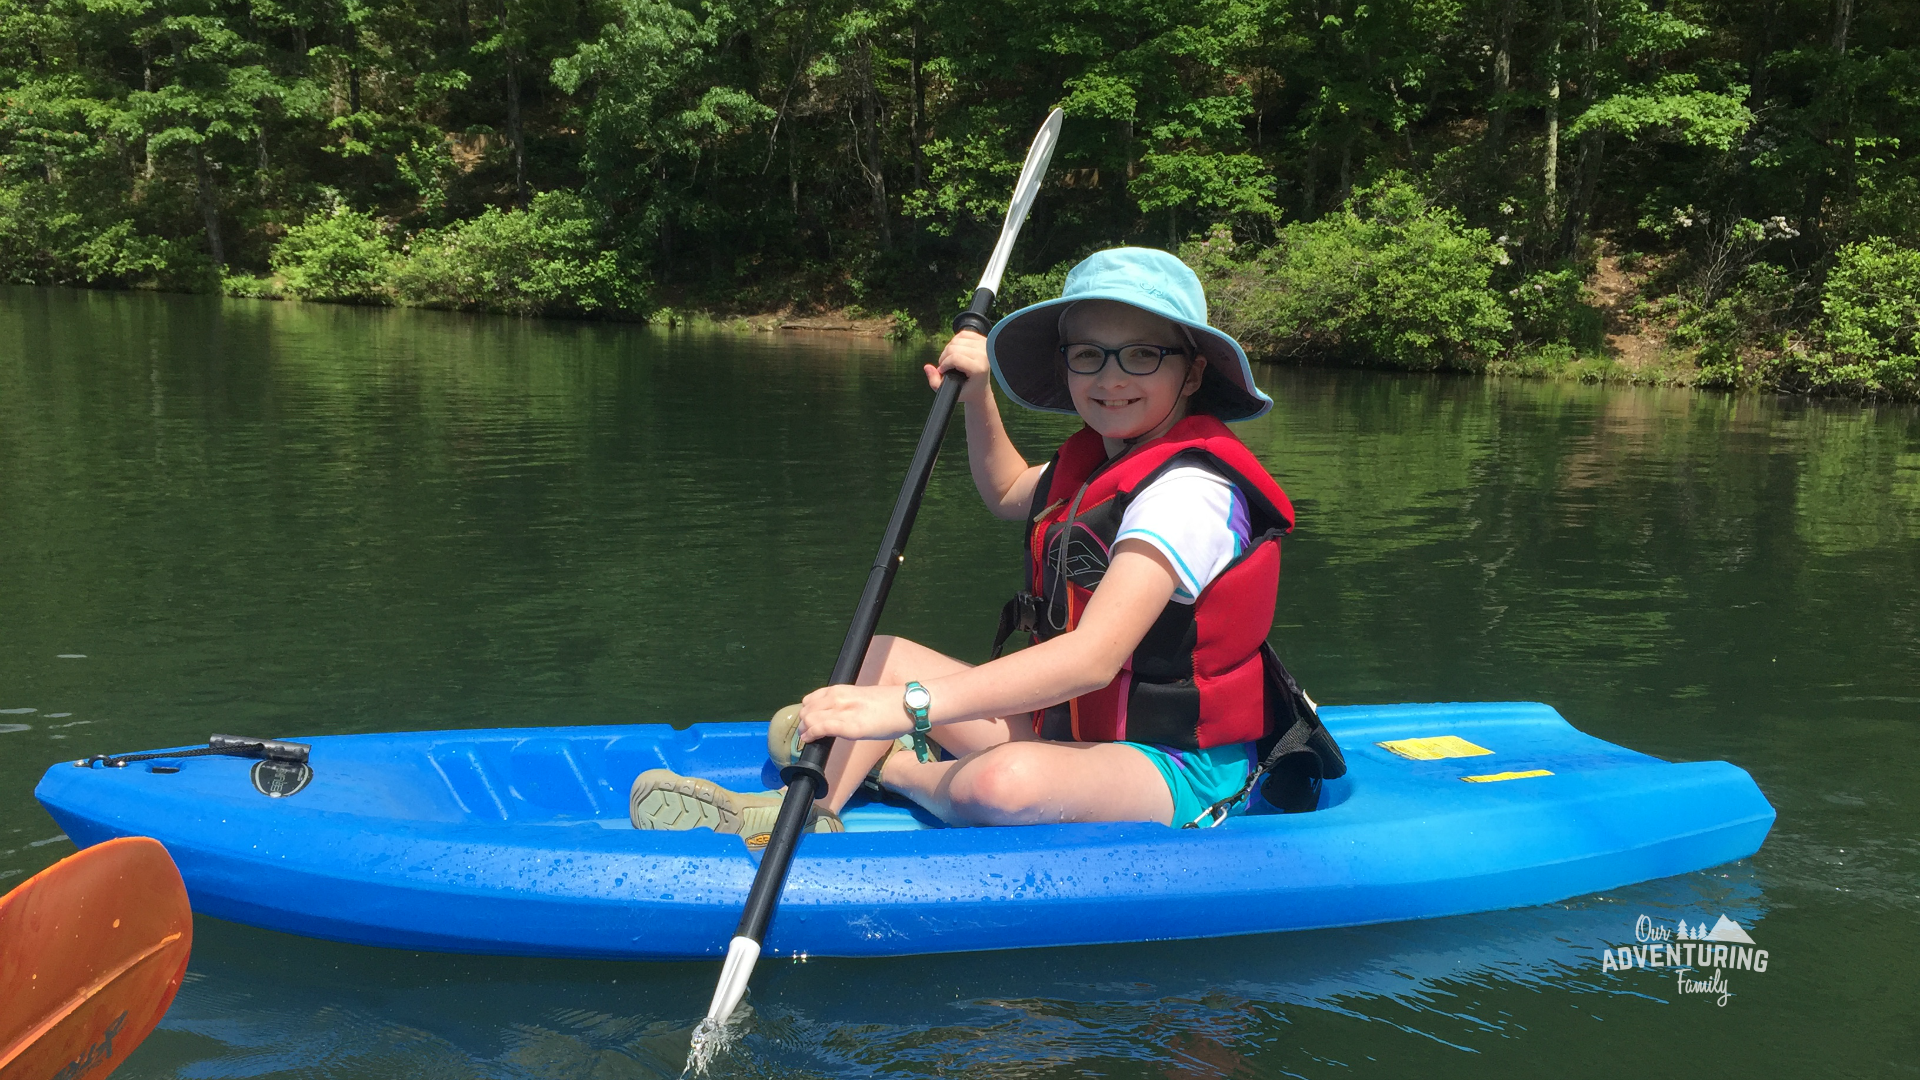 8 steps to kayaking with kids. Preteens love the independence of paddling their own kayak. Learn what you need to do to give kayaking as a solo parent a try at ouradventuringfamily.com.